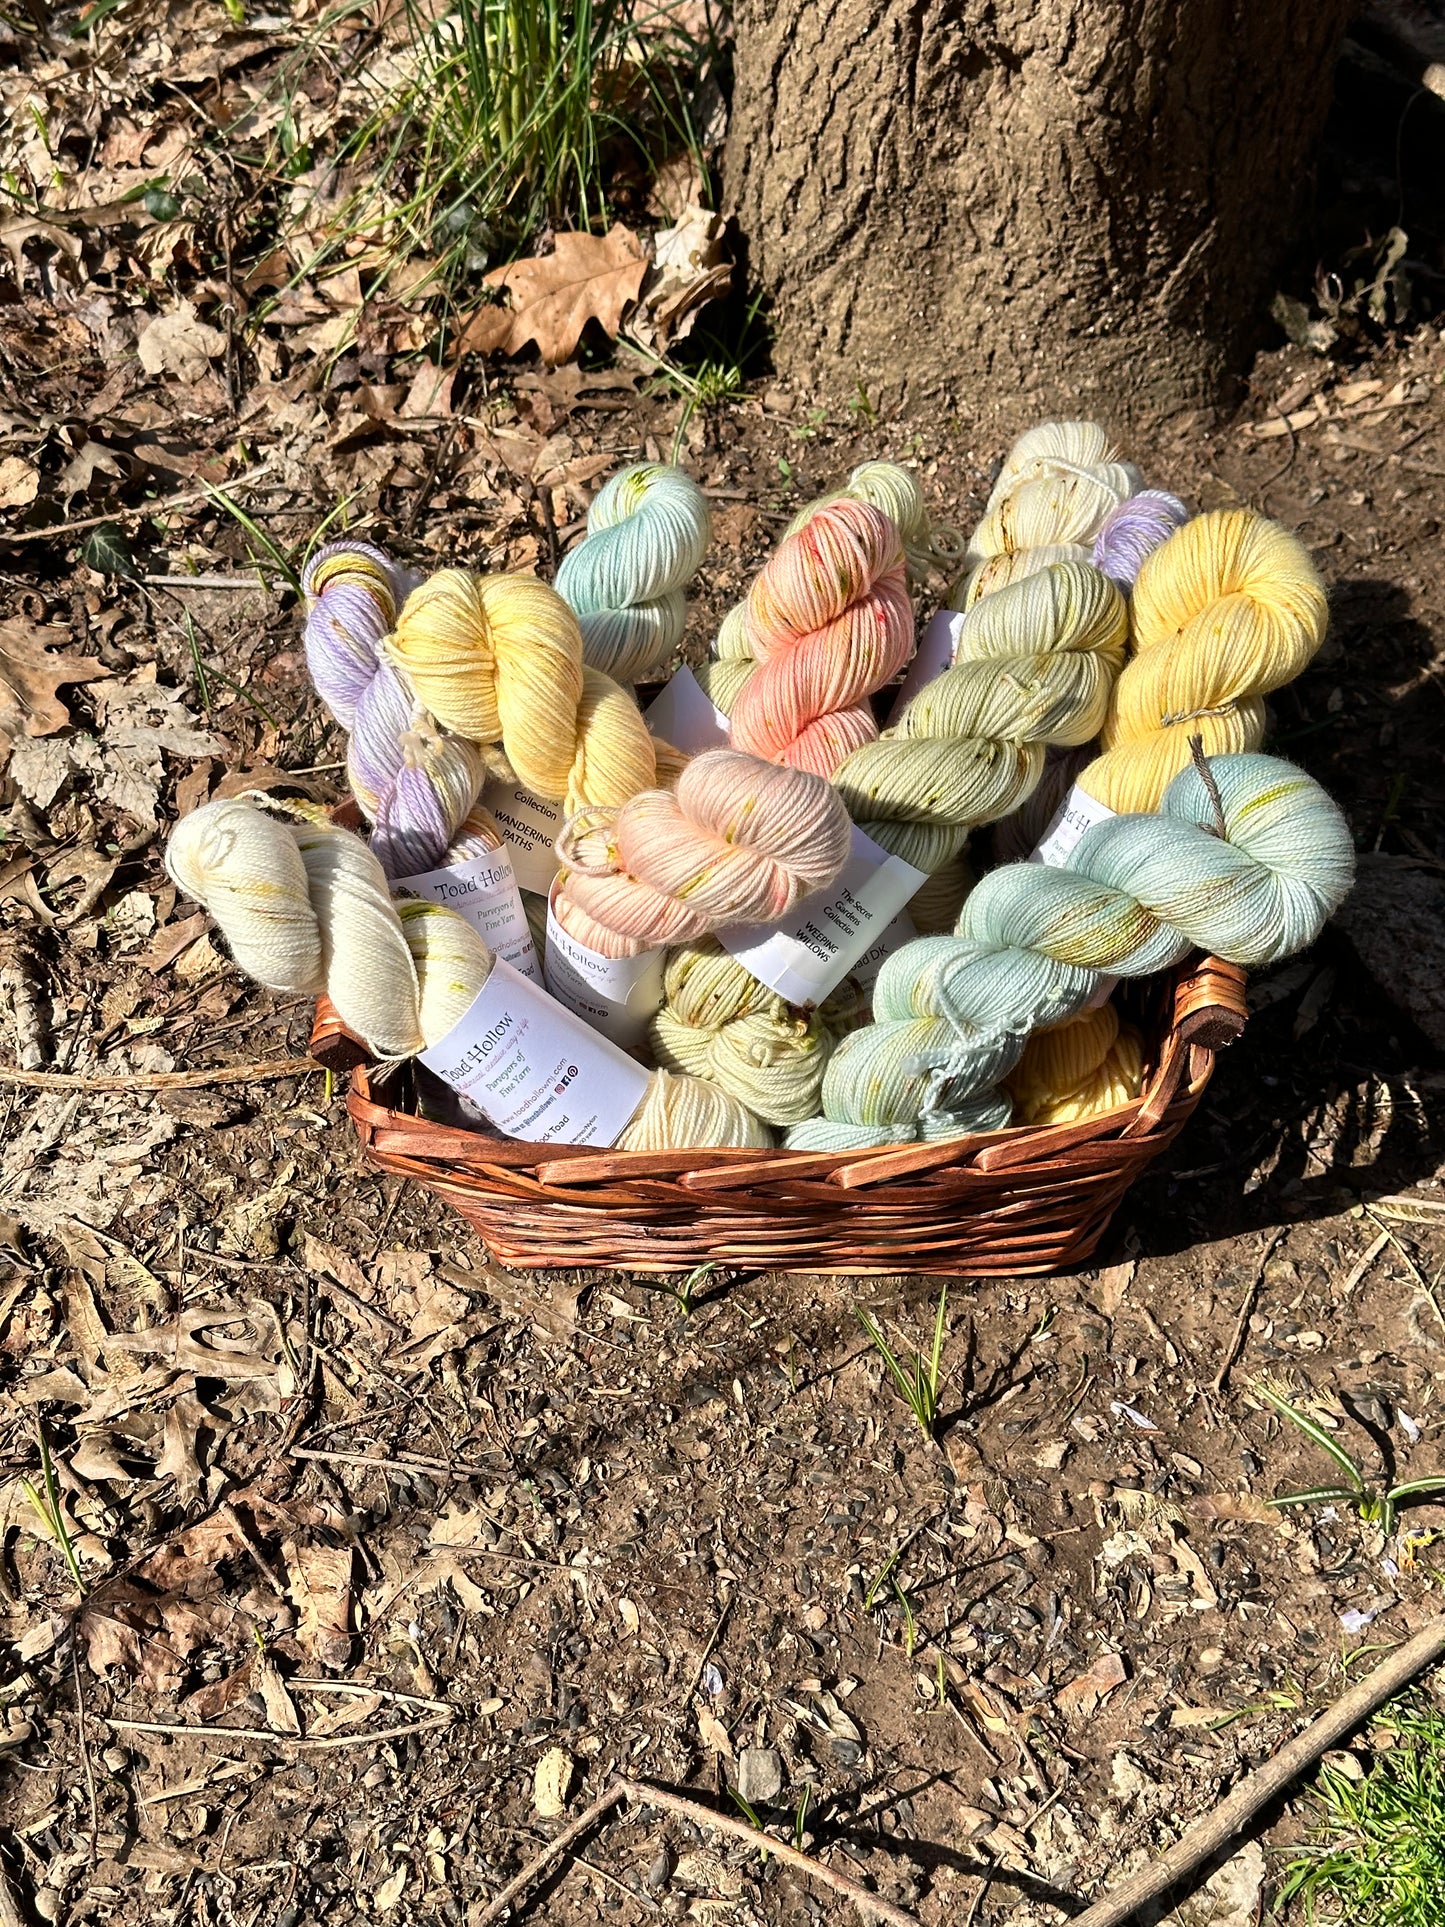 WHIMS OF WISTERIA from our Secret Gardens Collection, Hand Dyed Superwash Merino Yarn,Toad Hollow Yarns